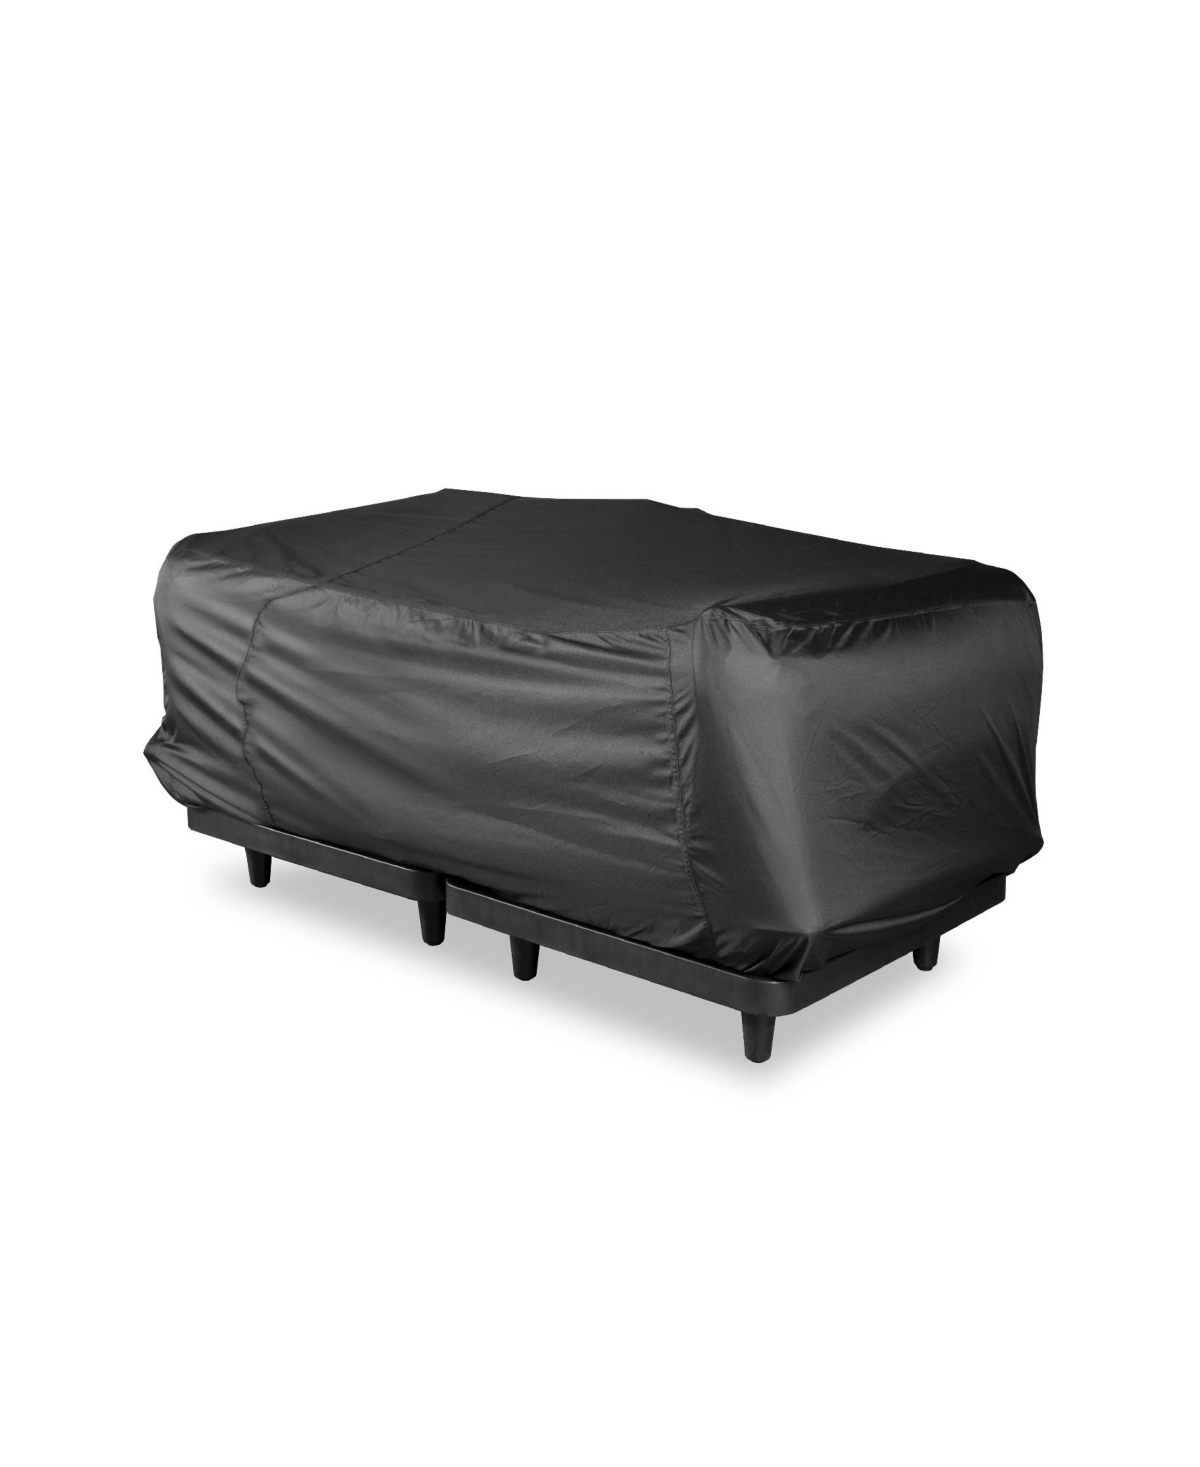 Fatboy Paletti Outdoor Modular 2-Seat Cover Lounge